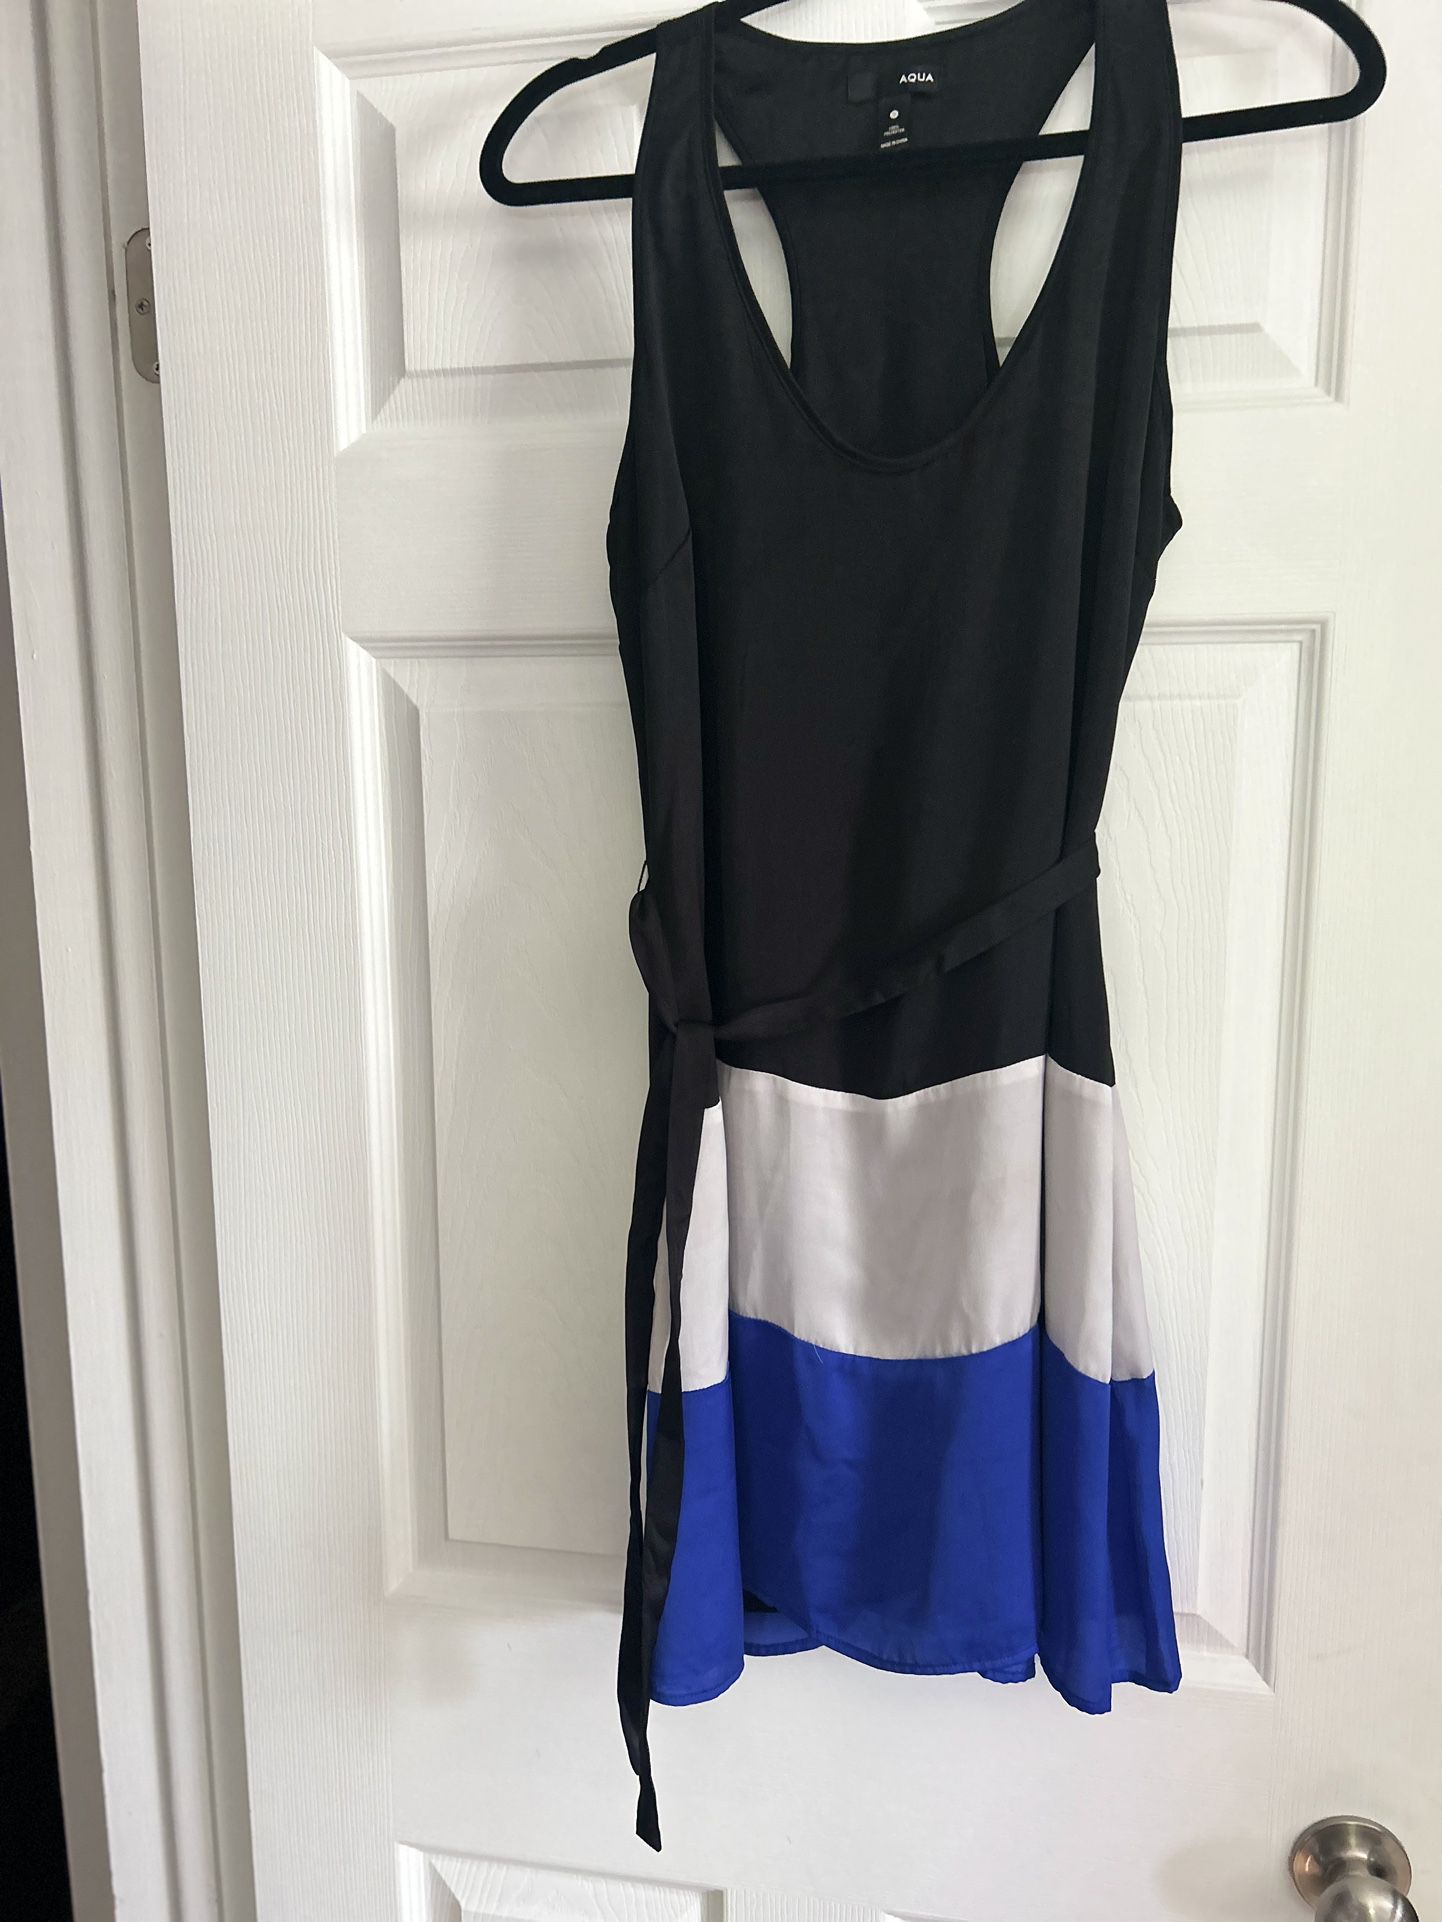 Women’s Size Small Black, Silver And Blue Short Dress $15